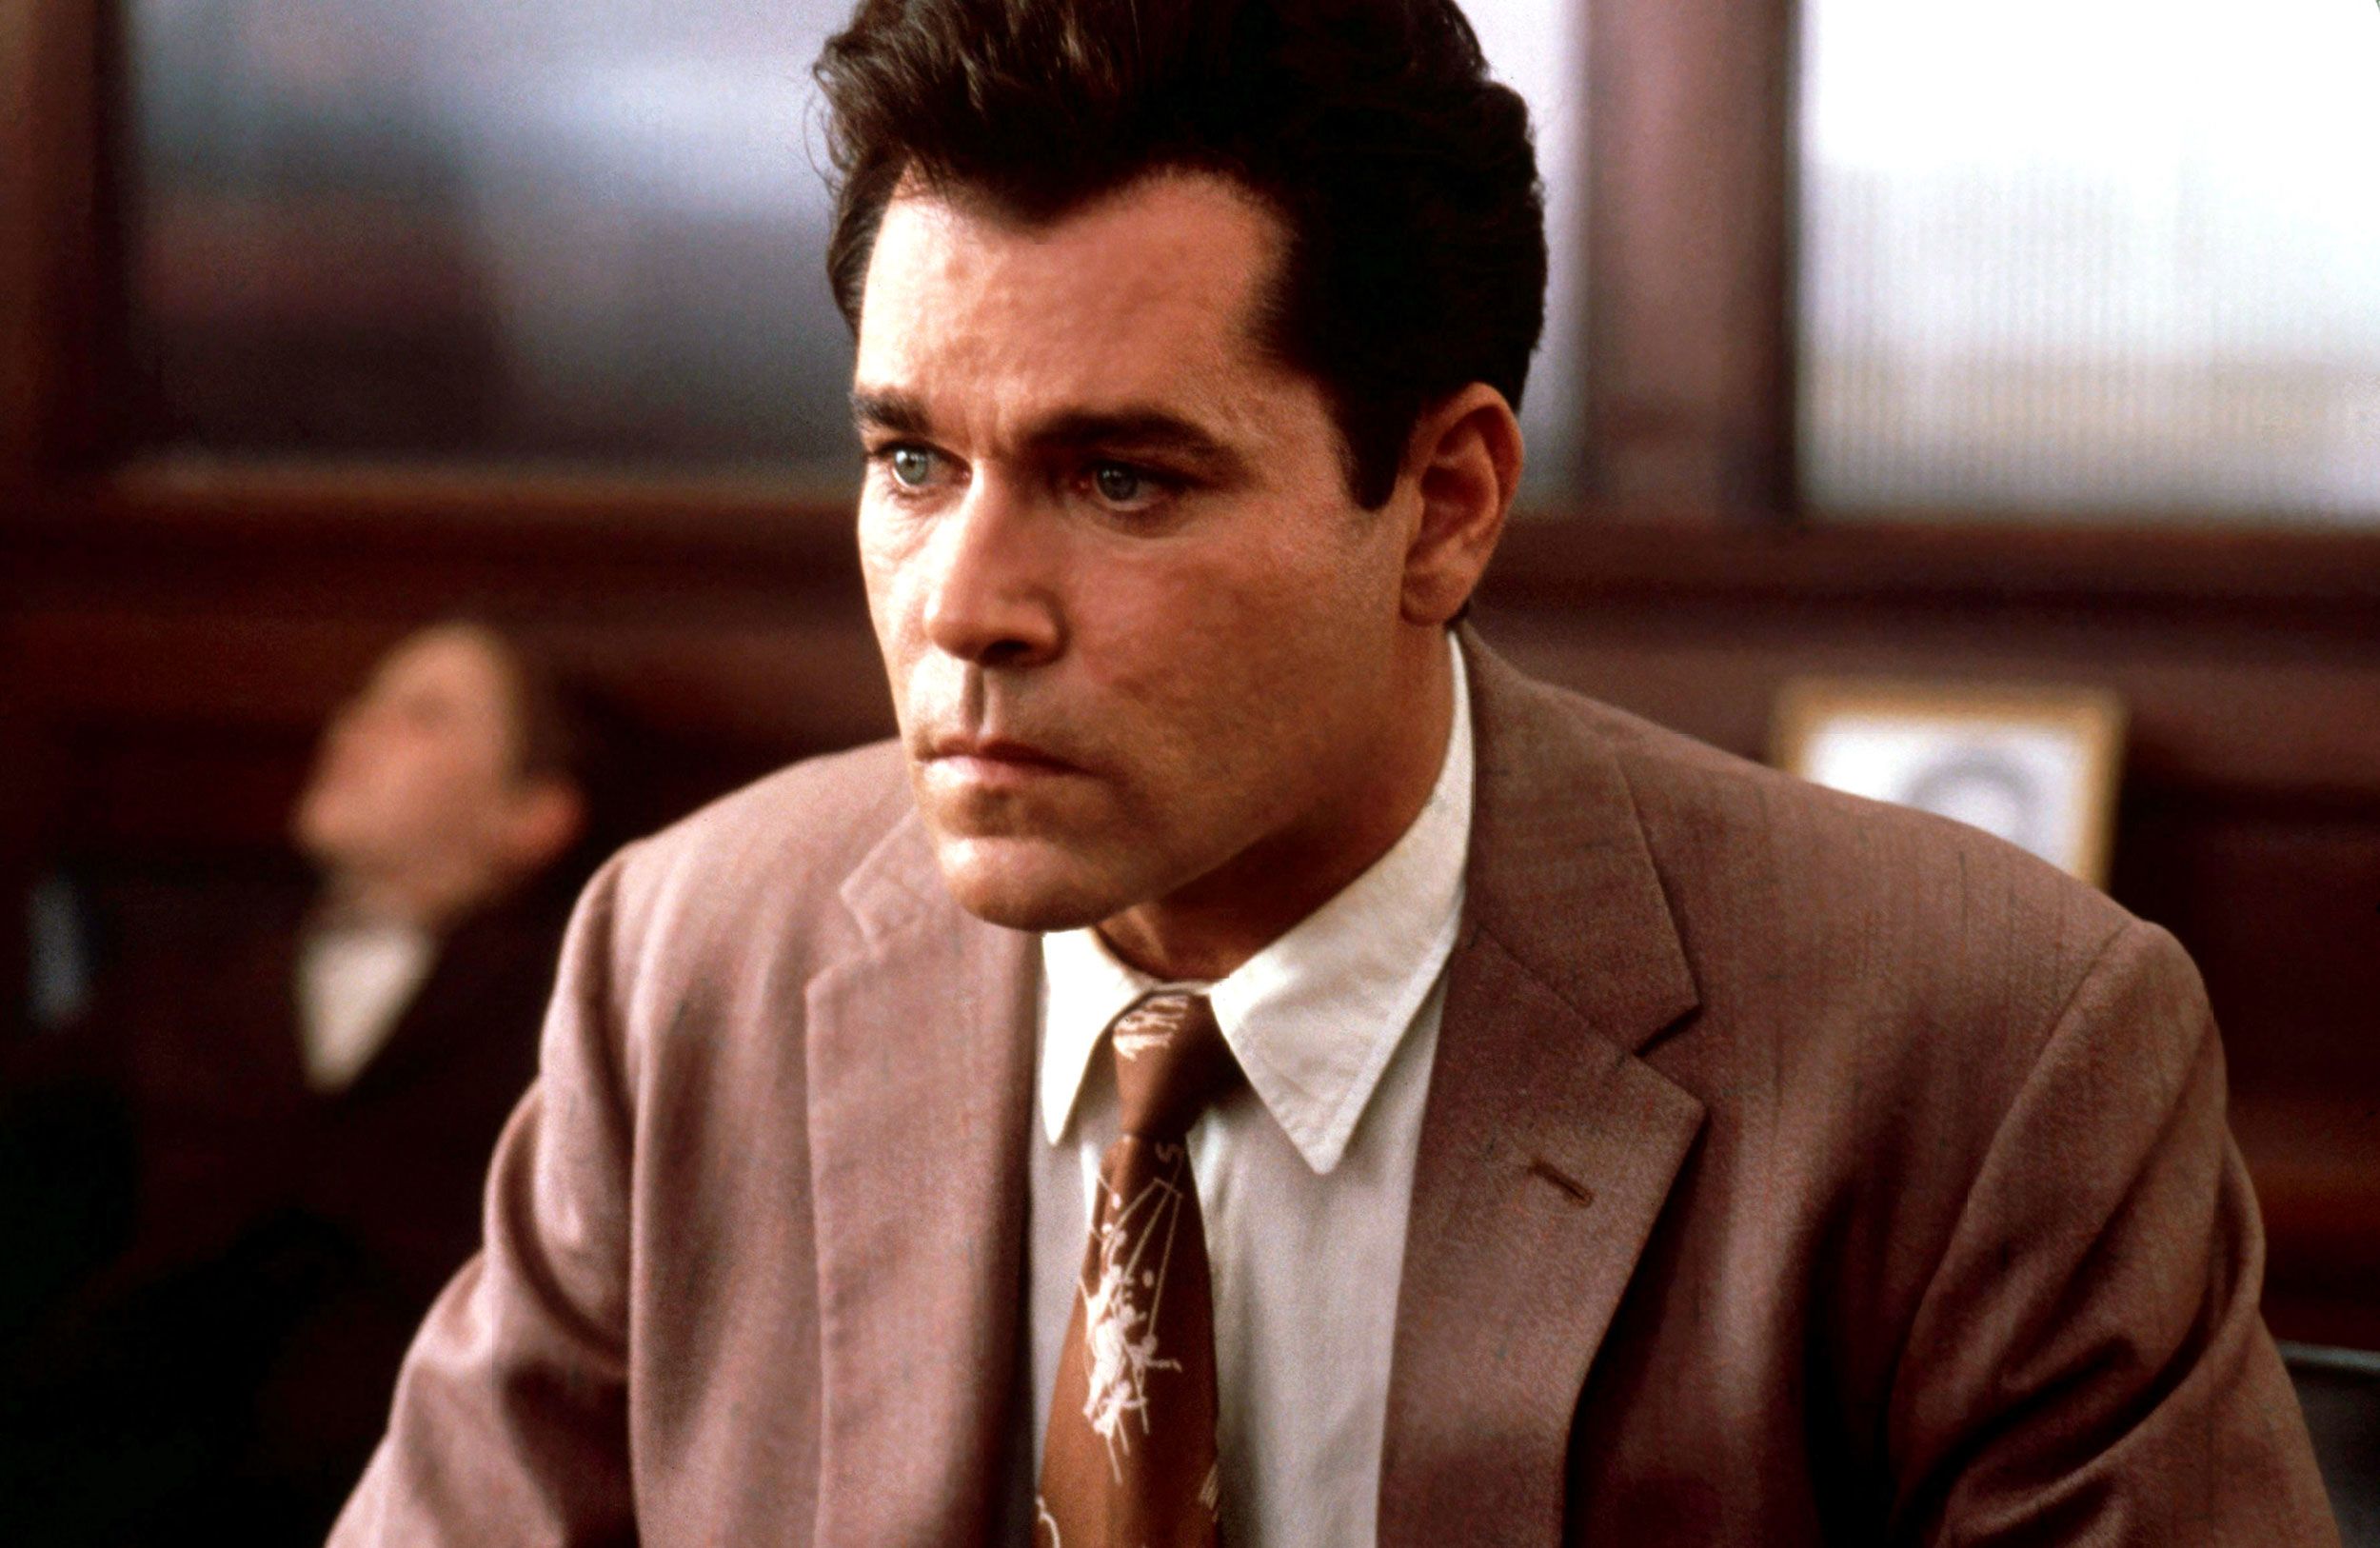 From 'Goodfellas' to 'Field of Dreams,' Ray Liotta's movie roles fulfilled  a 'Wild' promise, National